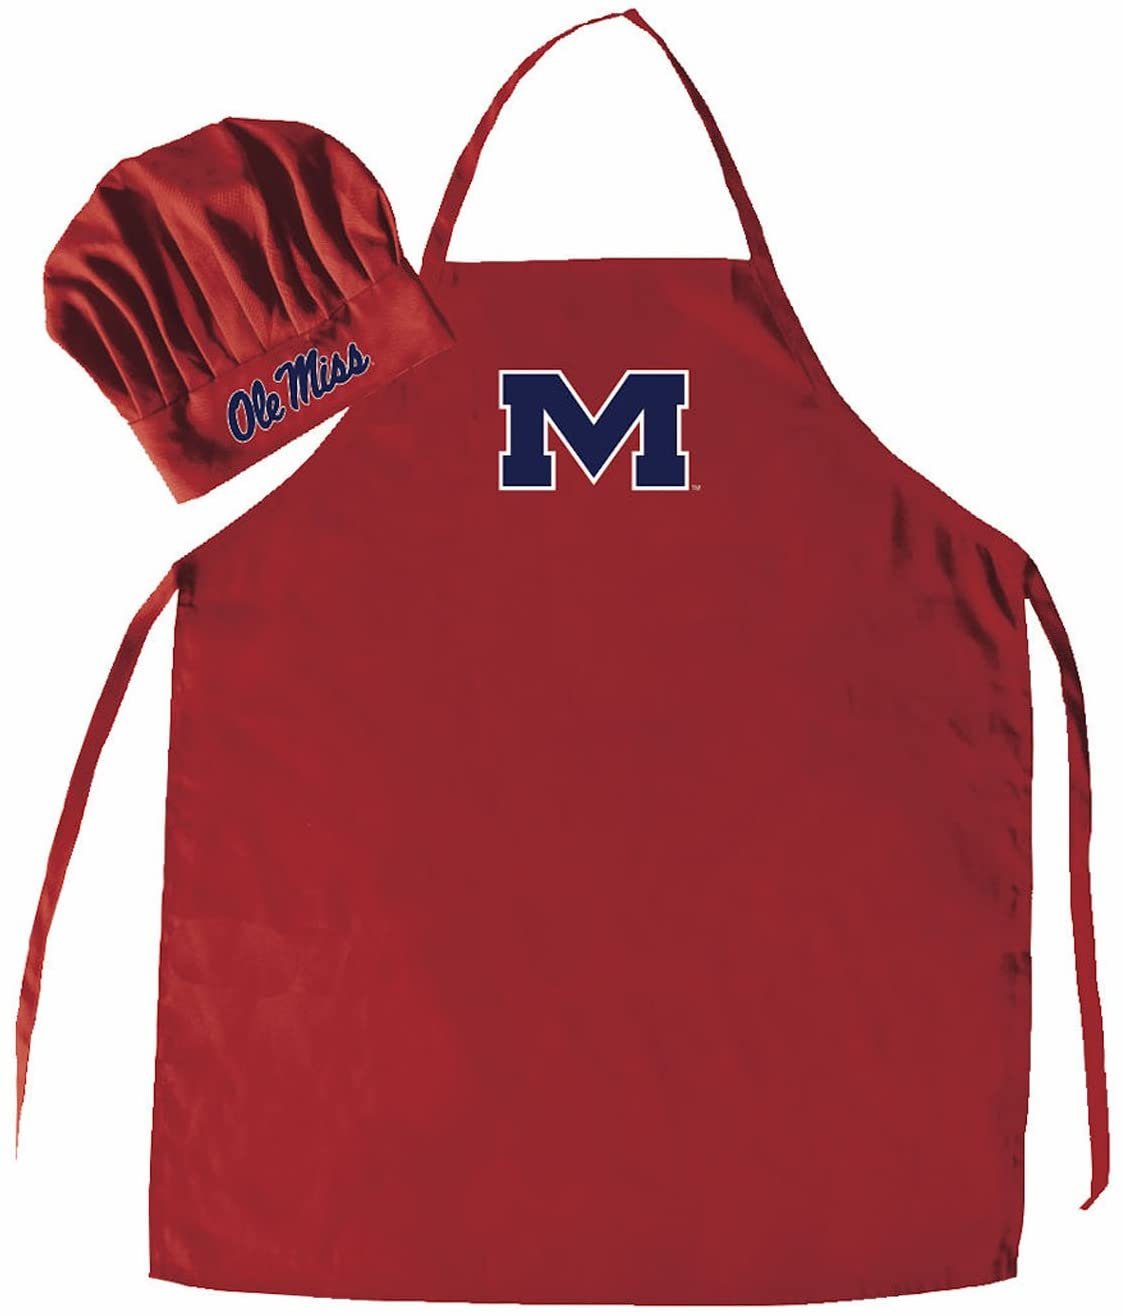 University of Mississippi Ole Miss Rebels Apron Chef Hat Set Full Color Universal Size Tie Back Grilling Tailgate BBQ Cooking Host